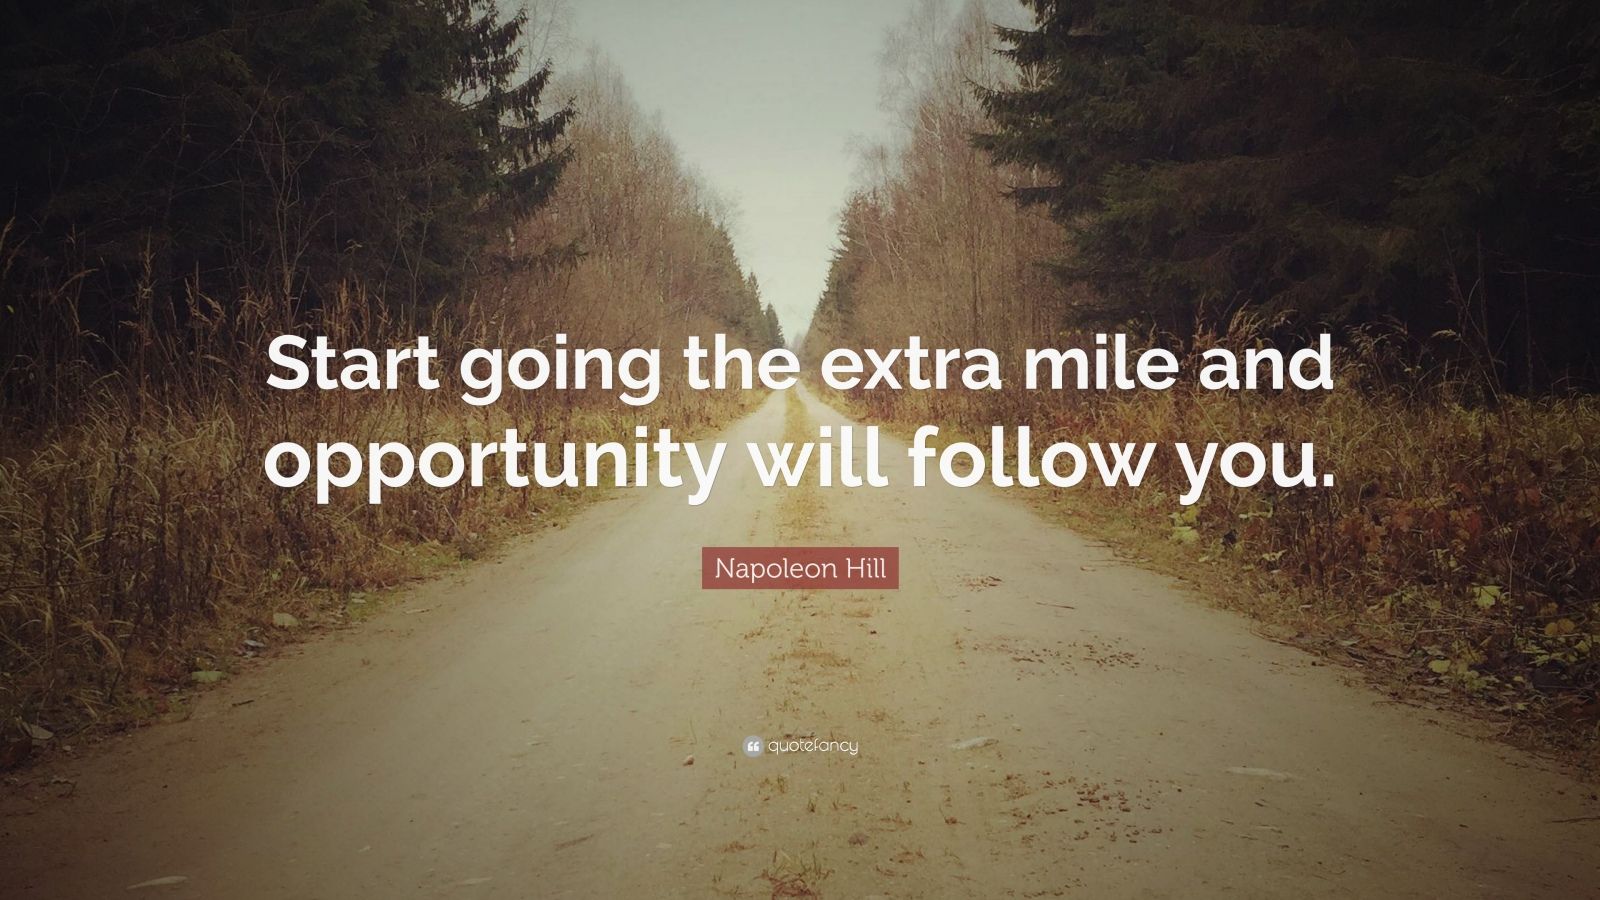 napoleon-hill-quote-start-going-the-extra-mile-and-opportunity-will